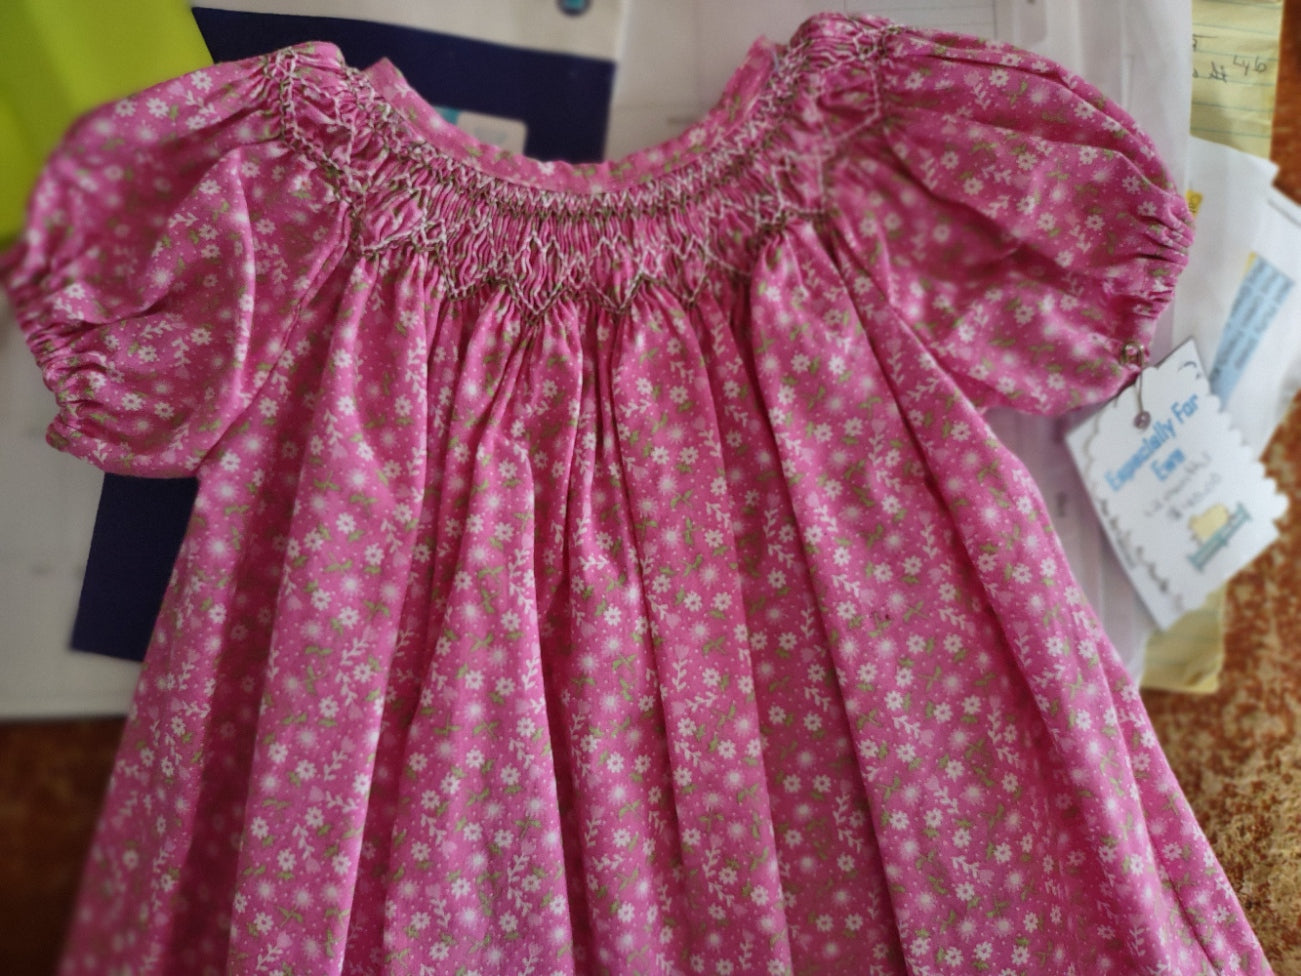 Pink Flower Geometric Design Dress - 12 months - Especially For Ewe Too